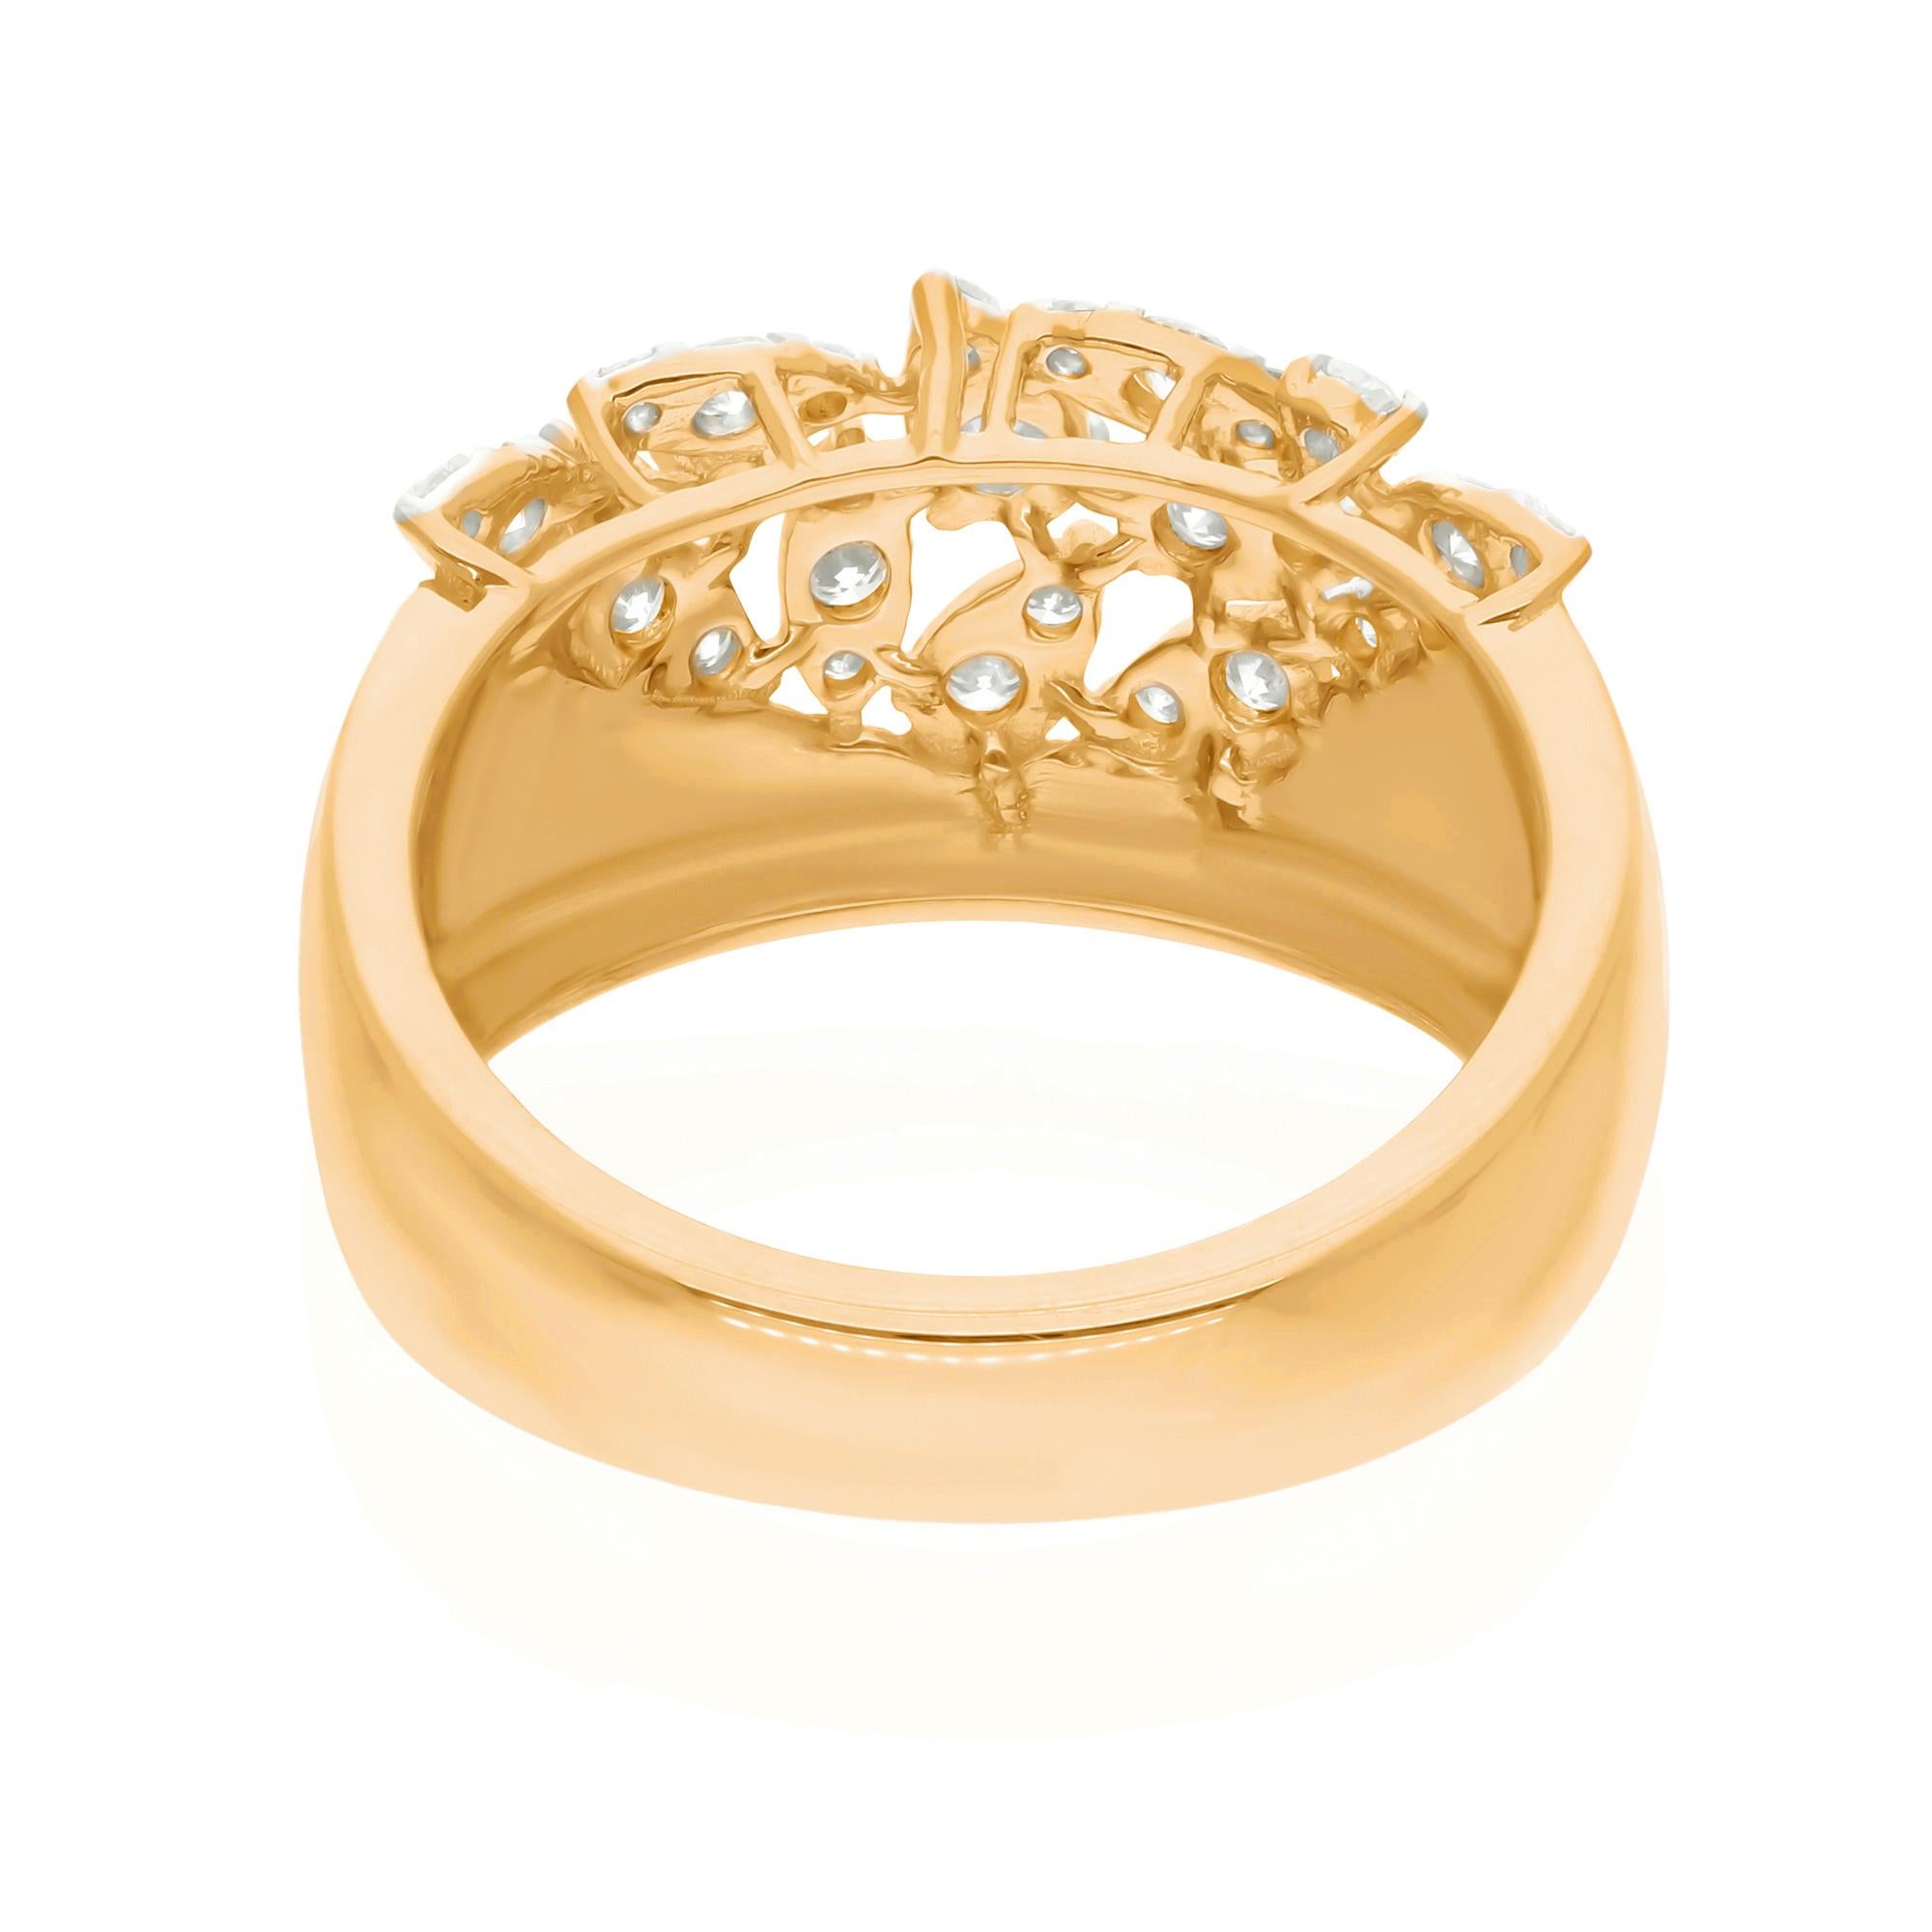 Set in a lustrous 14 karat yellow gold band, this ring exudes warmth and sophistication. The rich hue of the gold complements the diamond beautifully, creating a harmonious contrast that enhances the overall allure of the piece.

Item Code :-